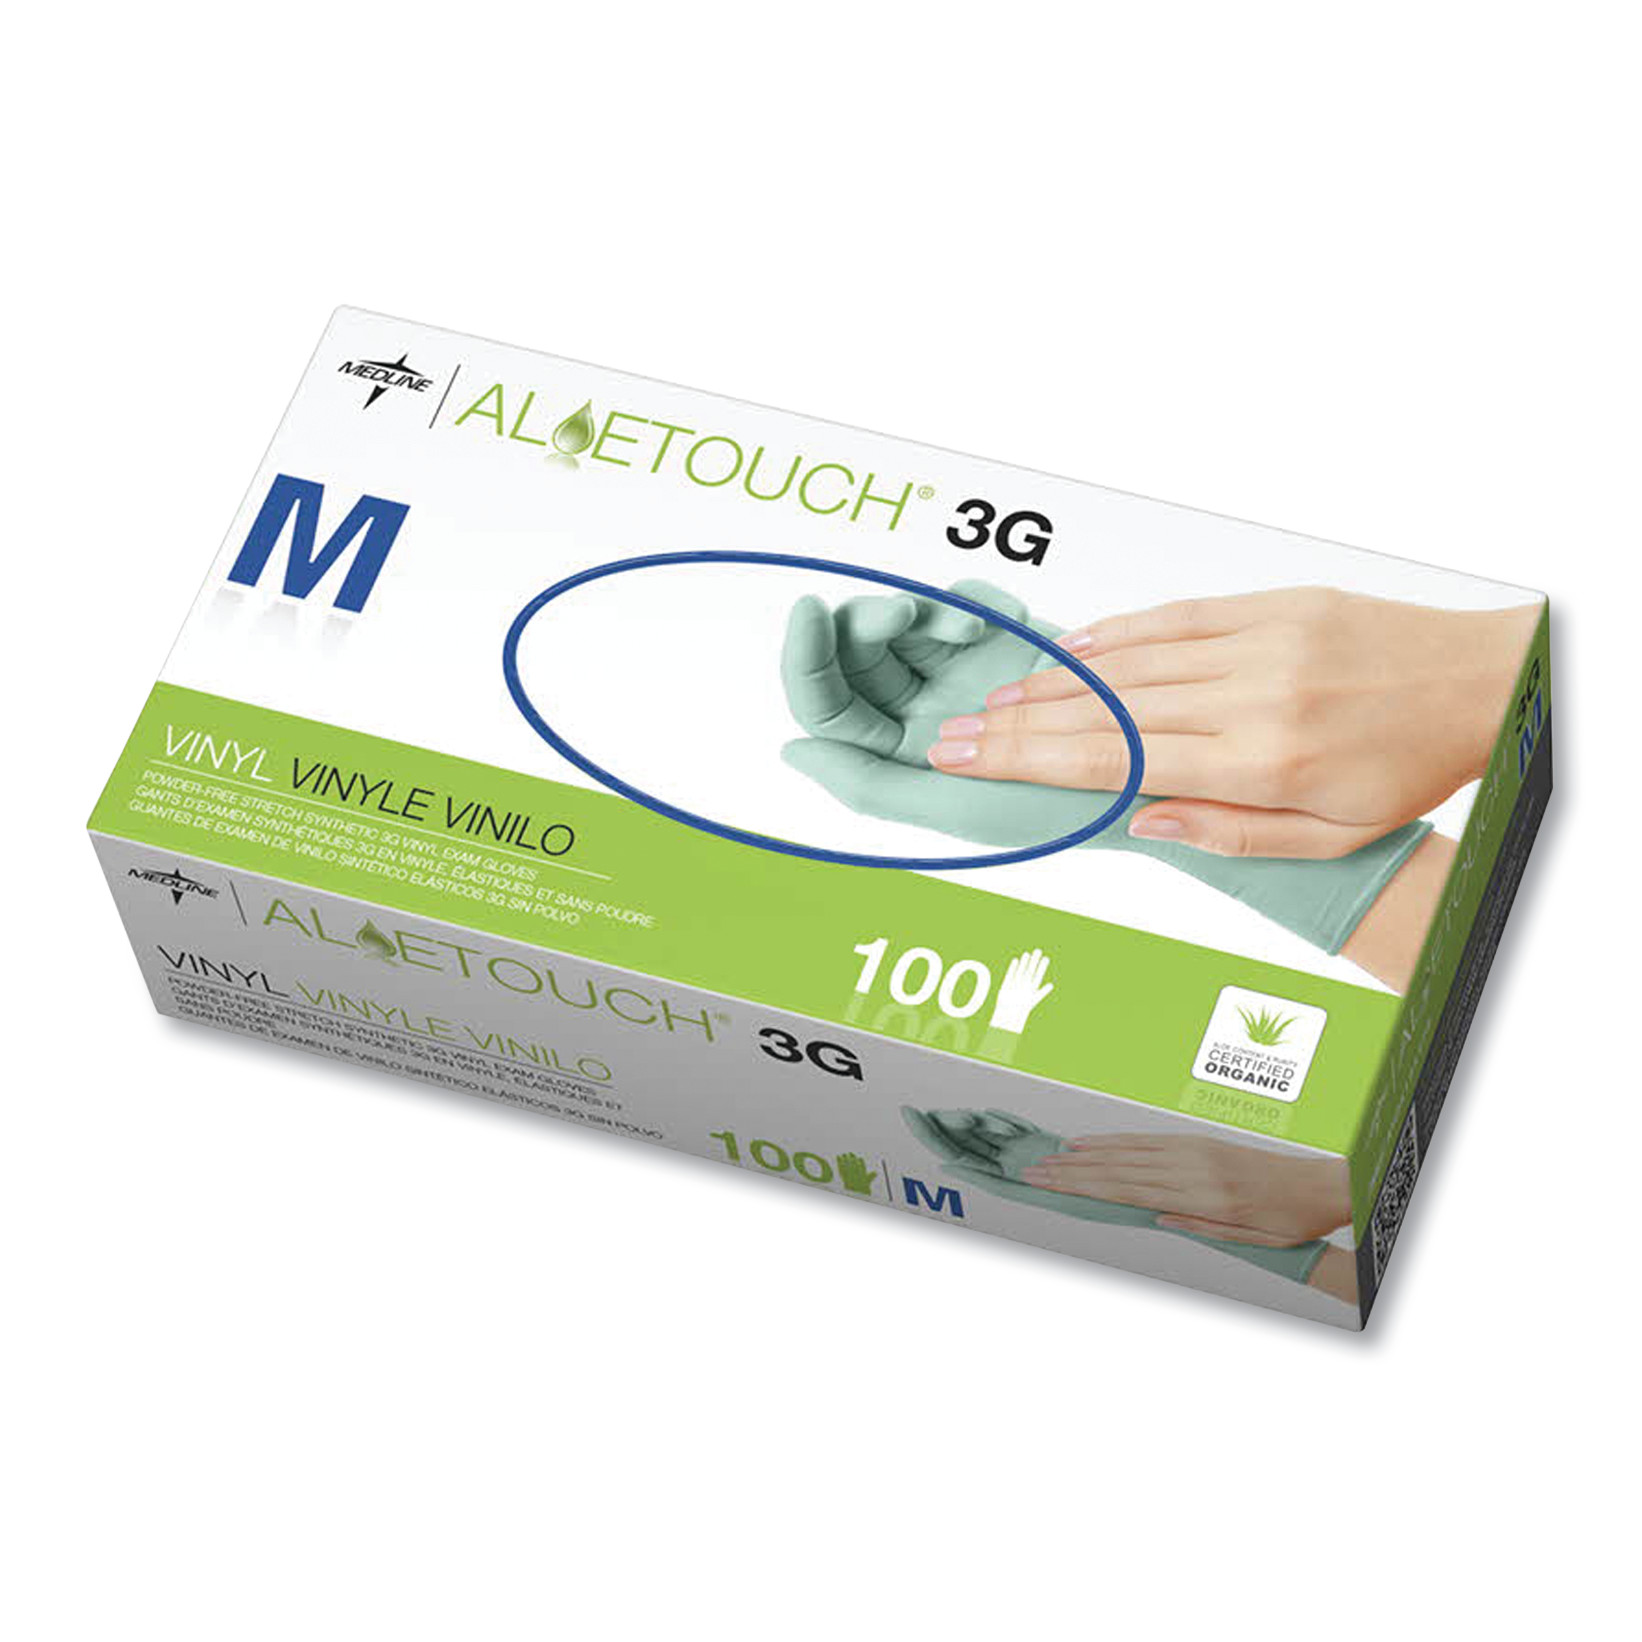  Medline 6MDS195175 Aloetouch 3G Synthetic Exam Gloves - CA Only, Green, Medium, 100/Box (MII6MDS195175) 